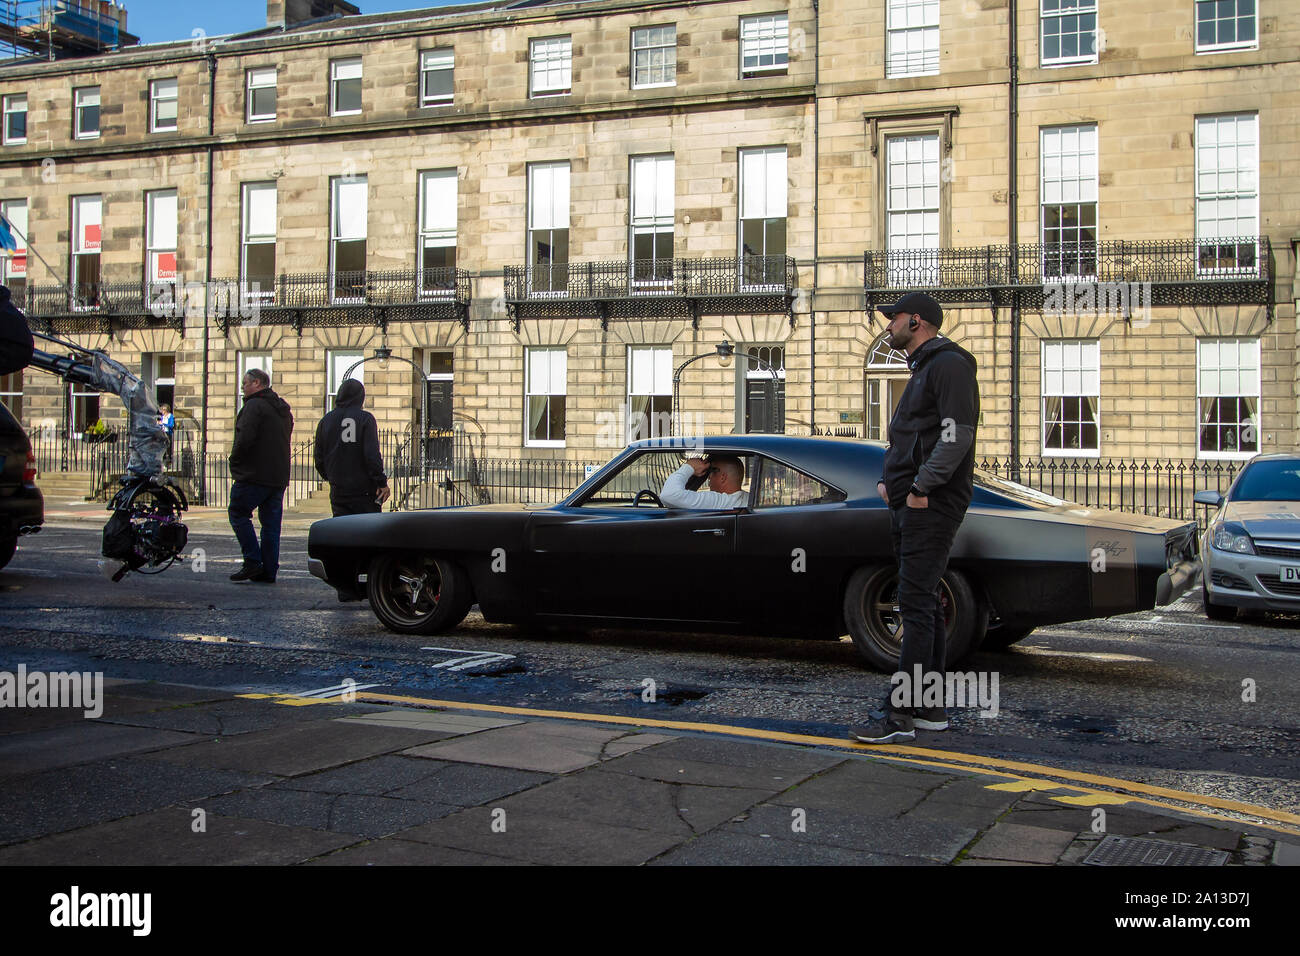 Vin Diesel S Stand In About To Film A Scene Fast Furious 9 Has Wrapped Production In Edinburgh After Several Weeks Of Filming For The Latest Movie In The High Octane Car Chase Franchise